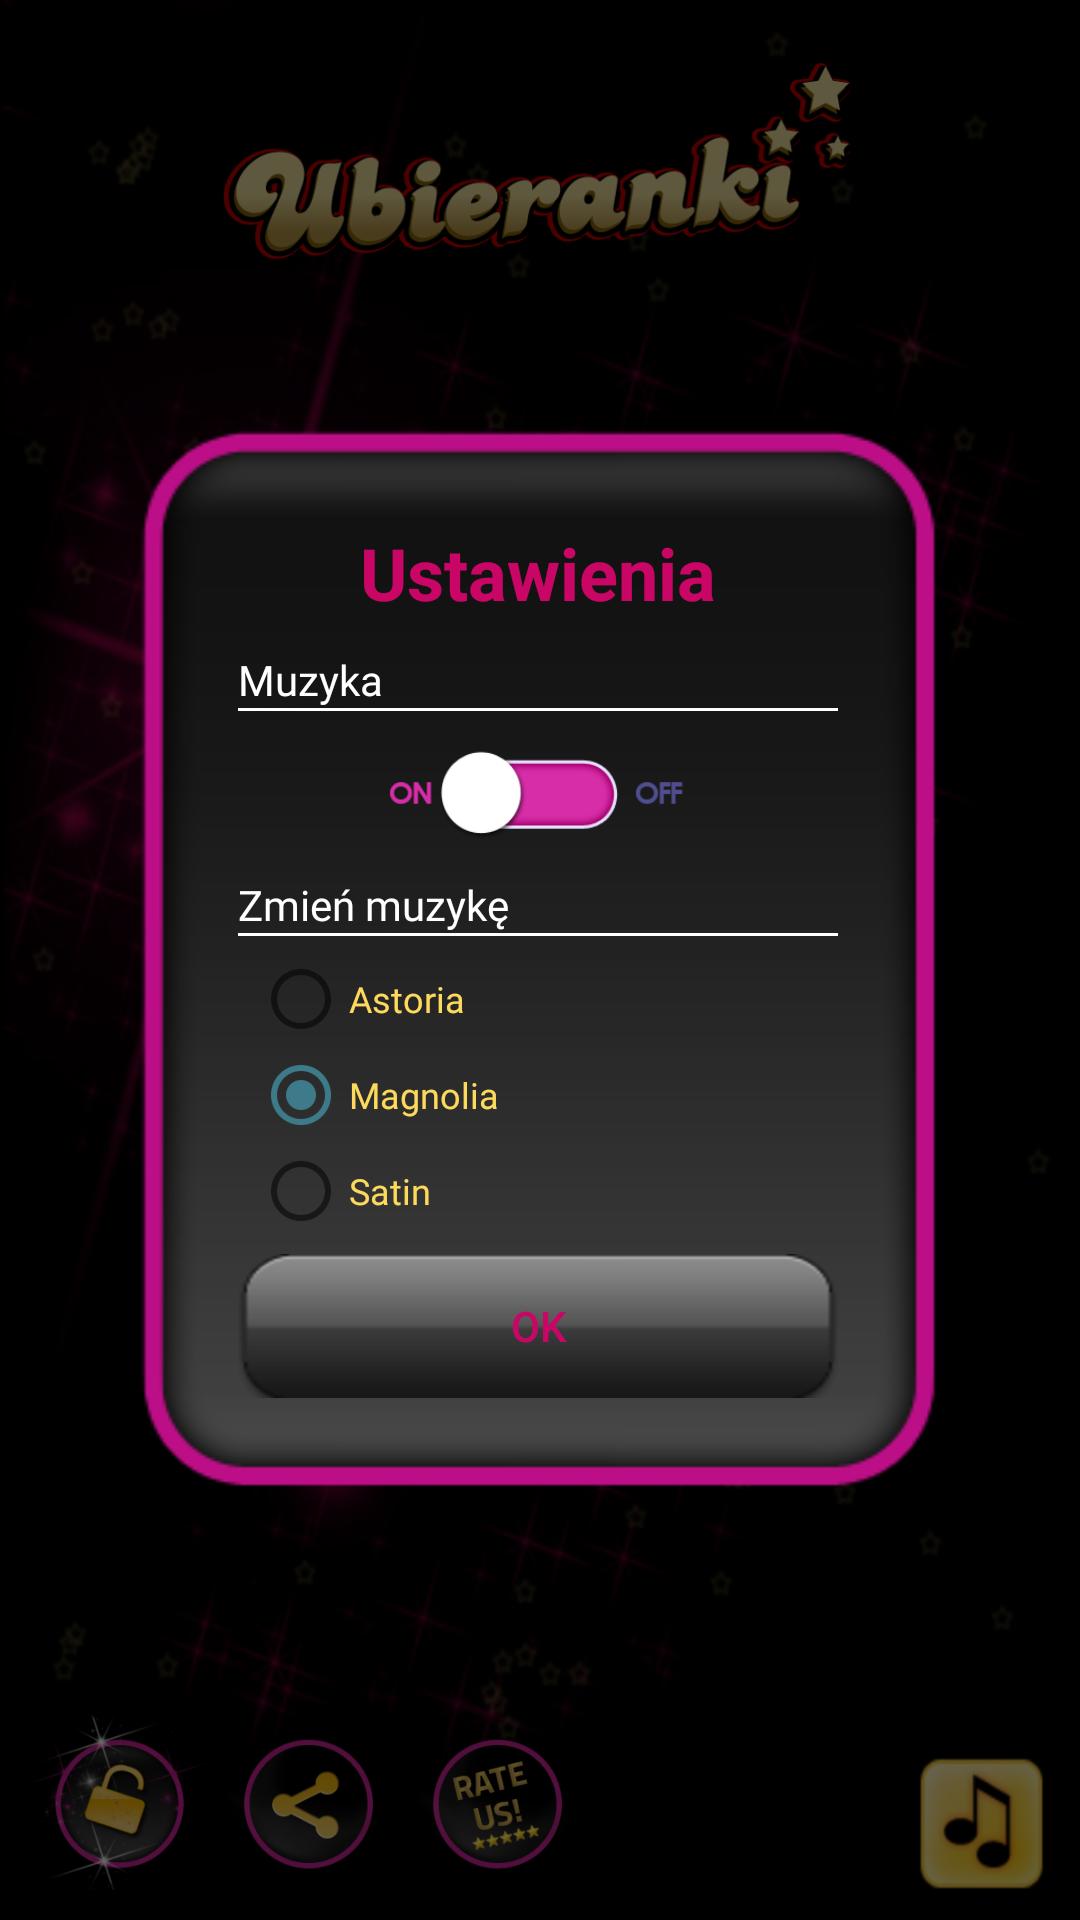 Ubieranki for Android - APK Download